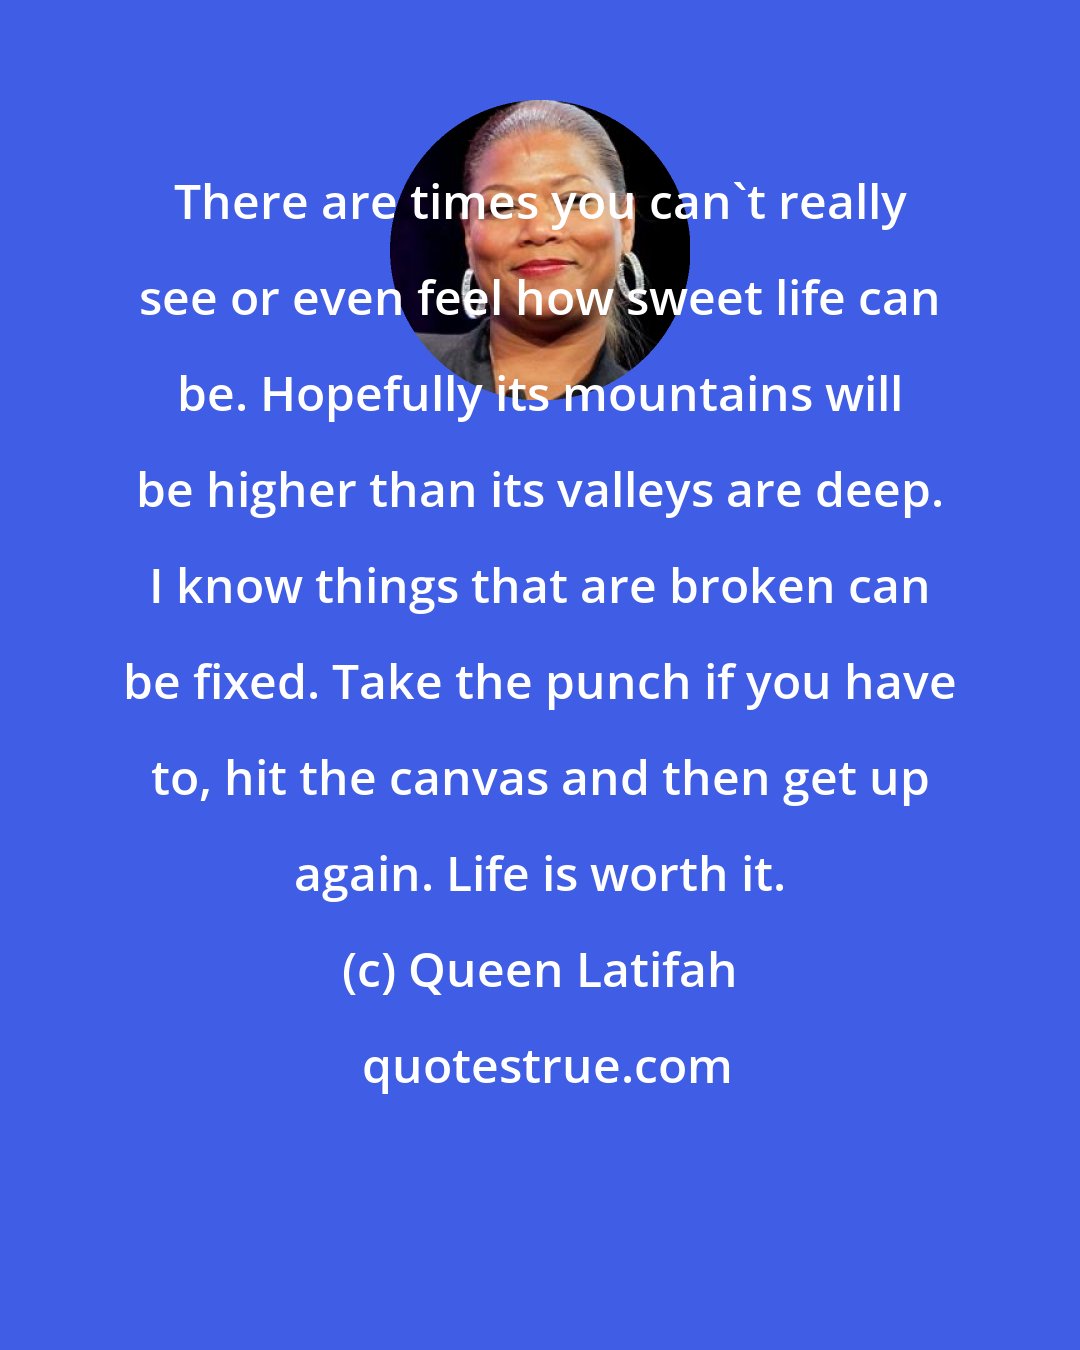 Queen Latifah: There are times you can't really see or even feel how sweet life can be. Hopefully its mountains will be higher than its valleys are deep. I know things that are broken can be fixed. Take the punch if you have to, hit the canvas and then get up again. Life is worth it.